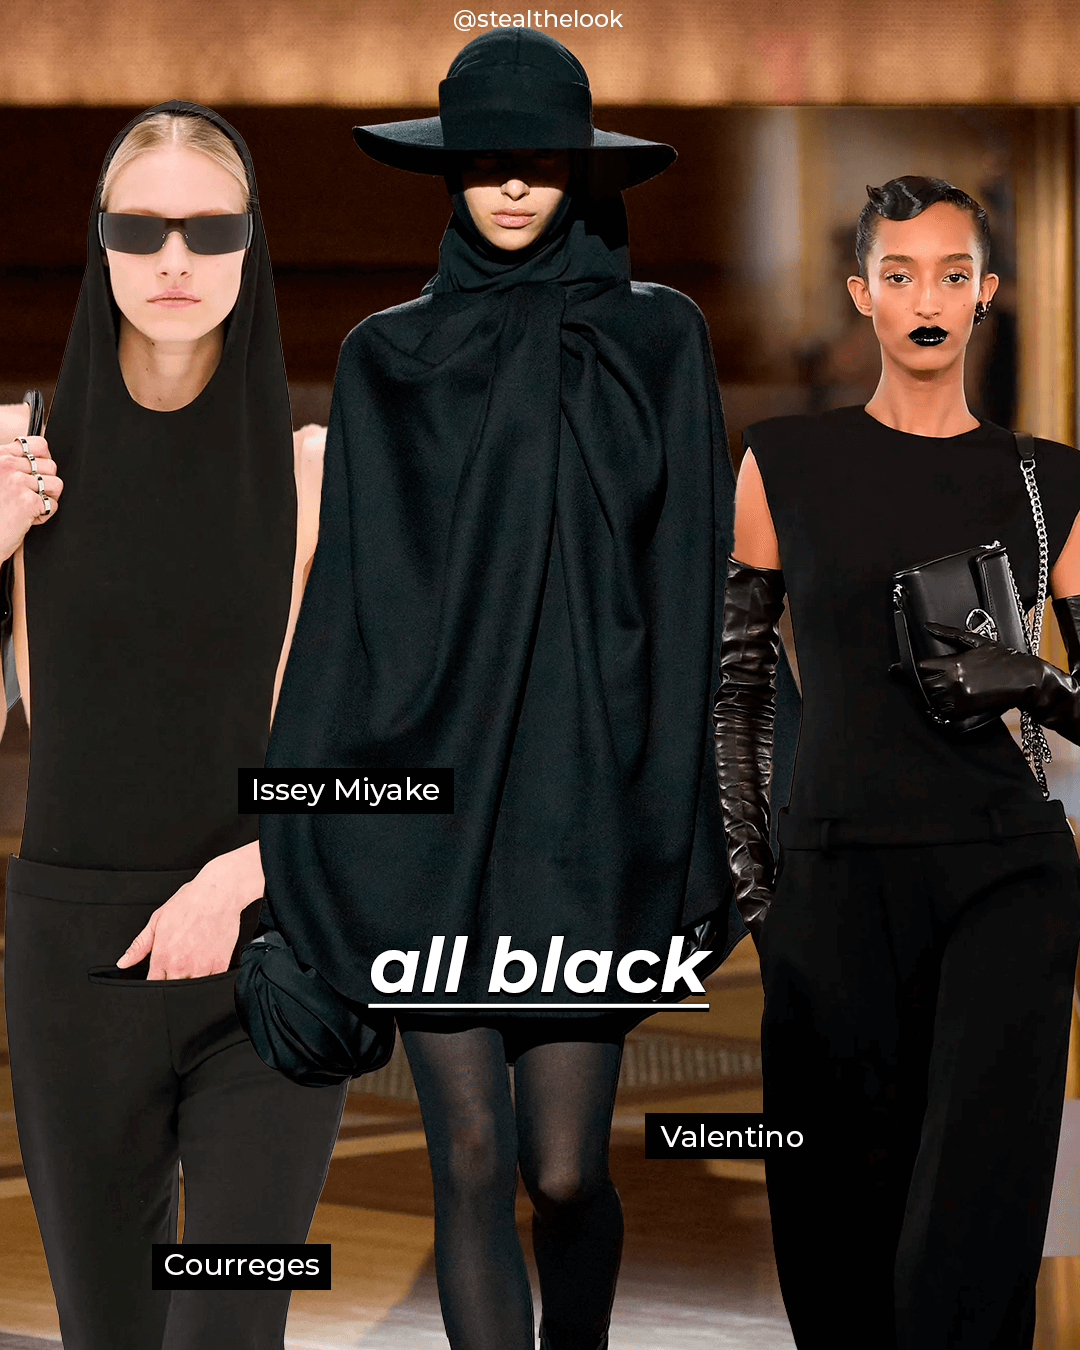 Courrèges, Valentino e Issey Miyake - all black - look todo preto - Inverno - Paris - https://stealthelook.com.br